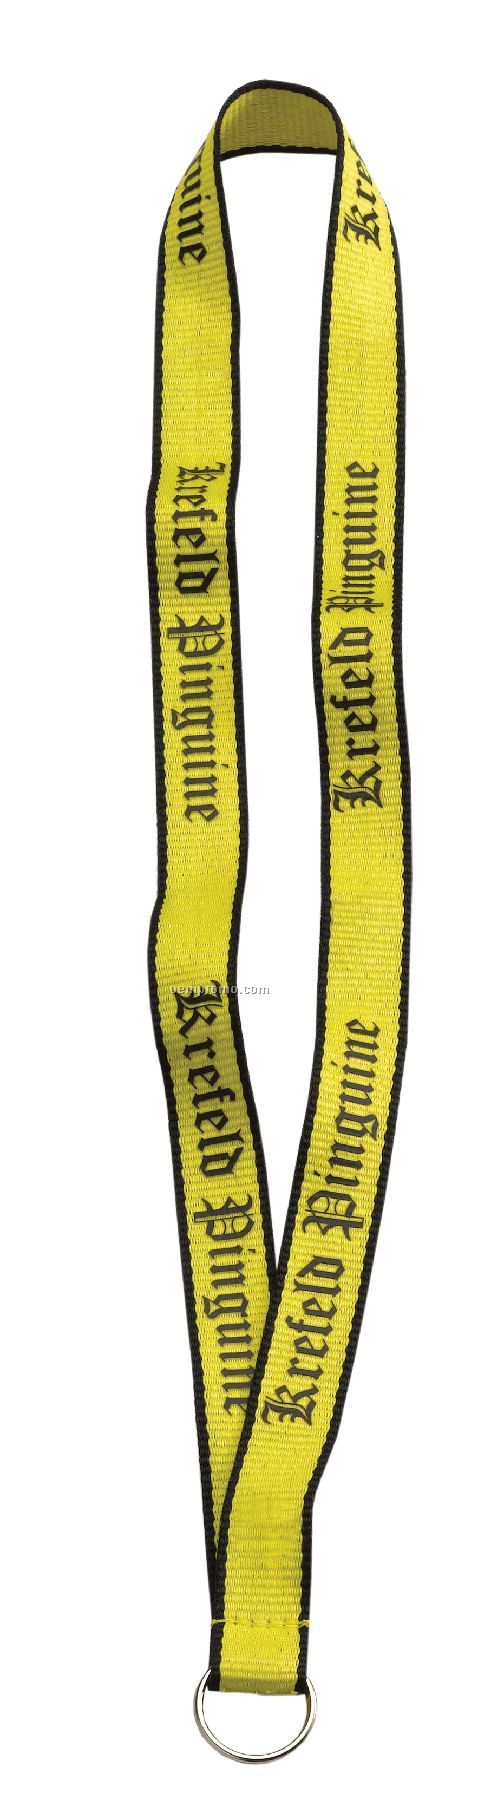 3/4" Imported Polyester Lanyard With Woven Border & Metal Split Ring